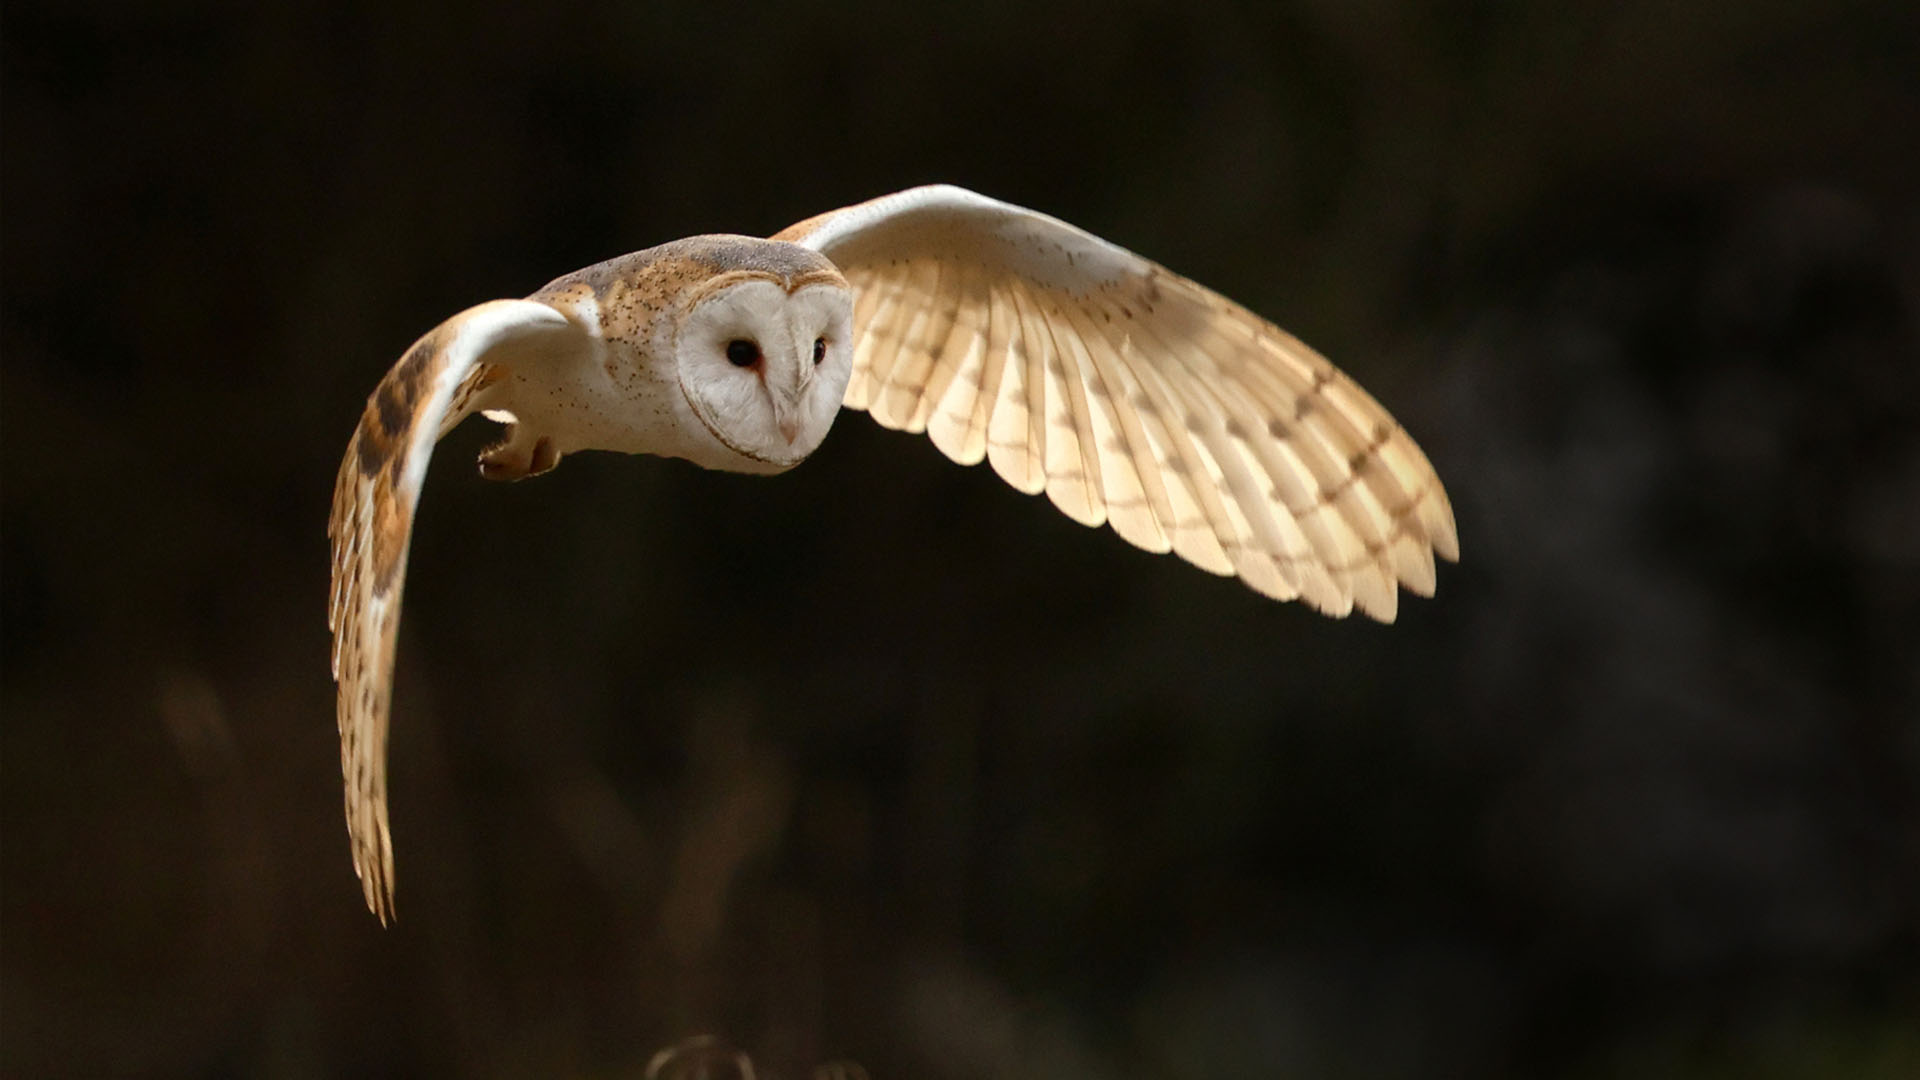 Probing the Auditory System of Owls